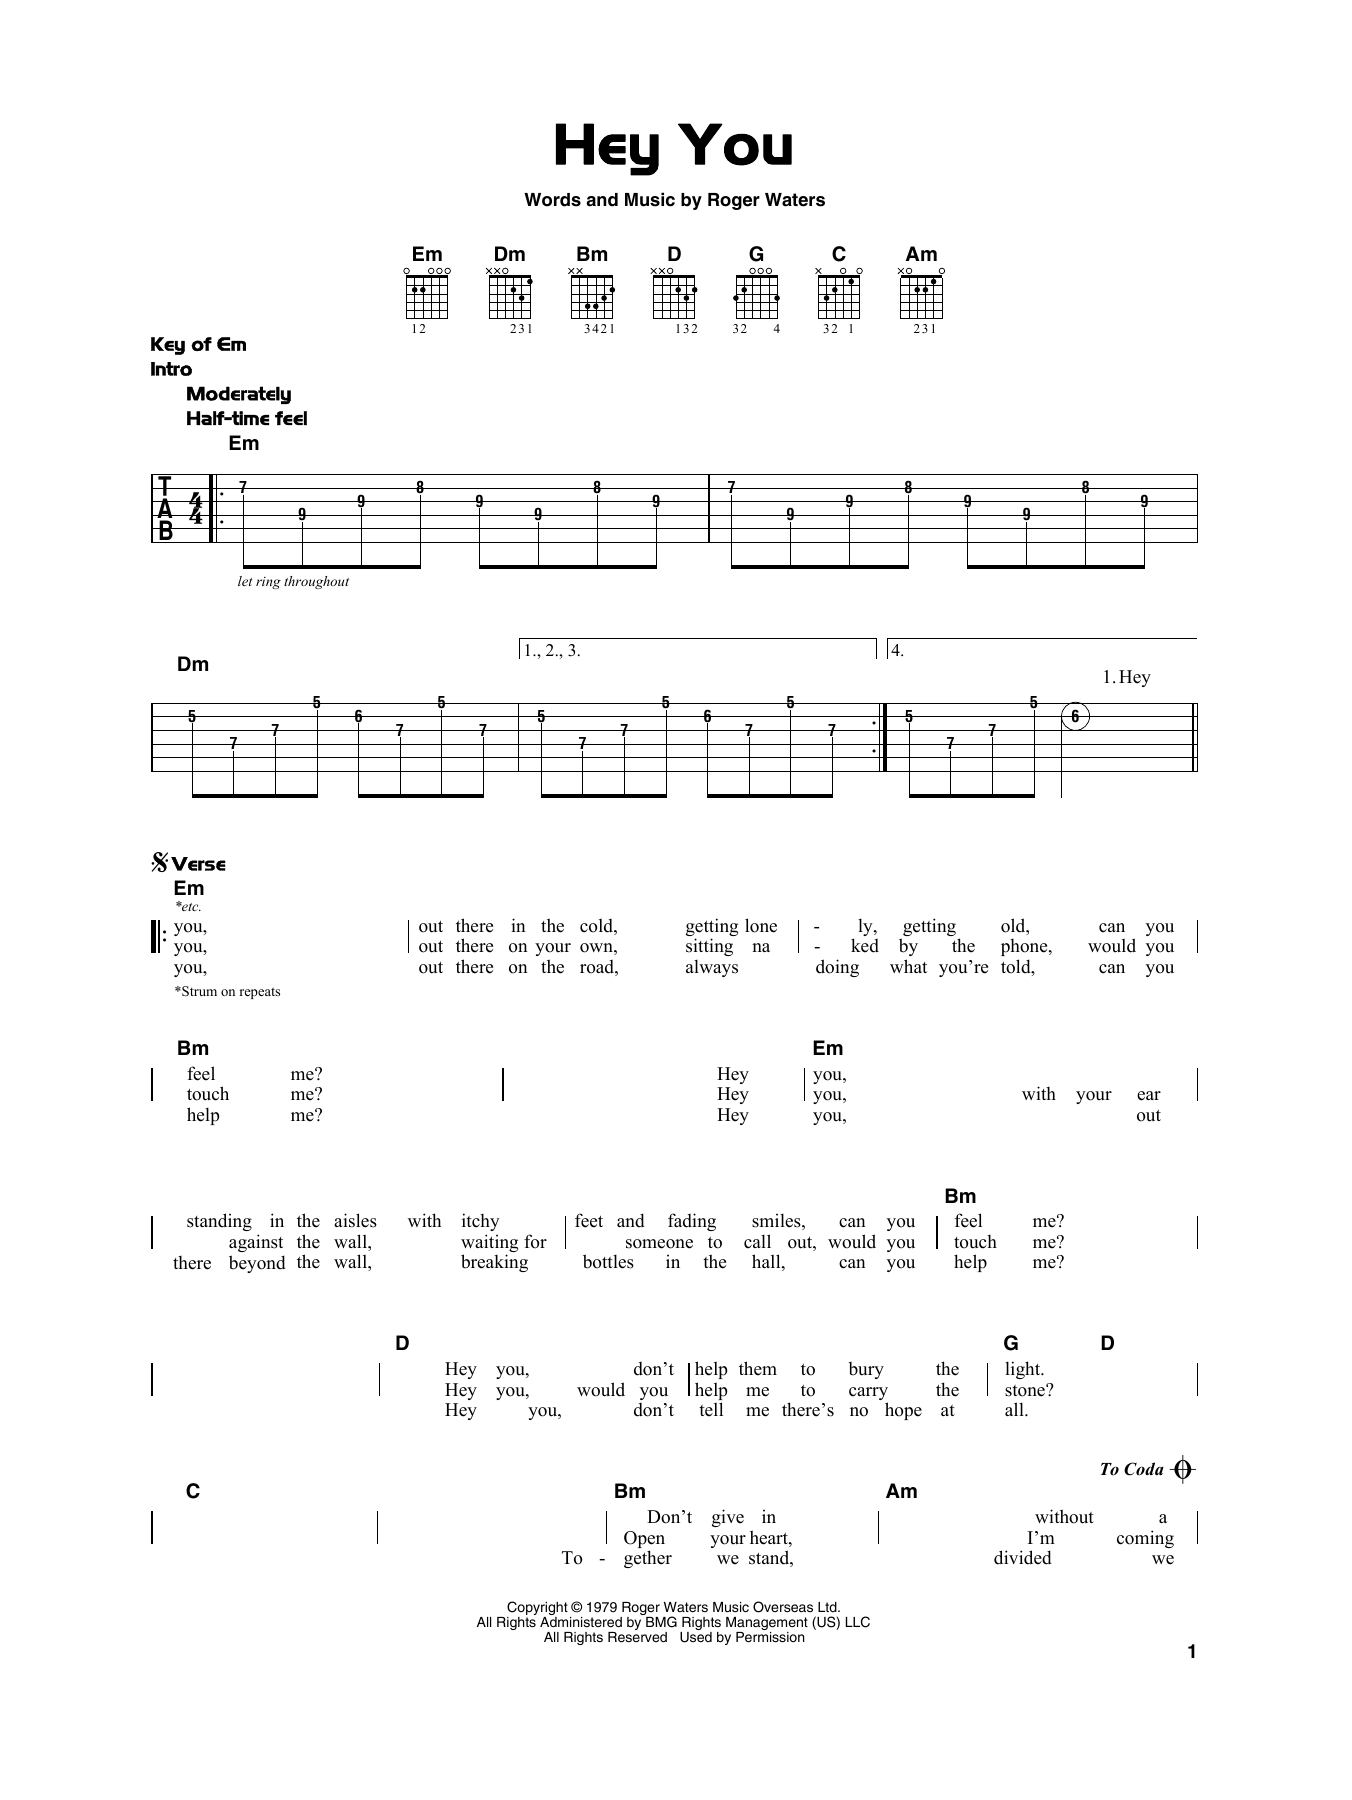 Download Pink Floyd Hey You Sheet Music